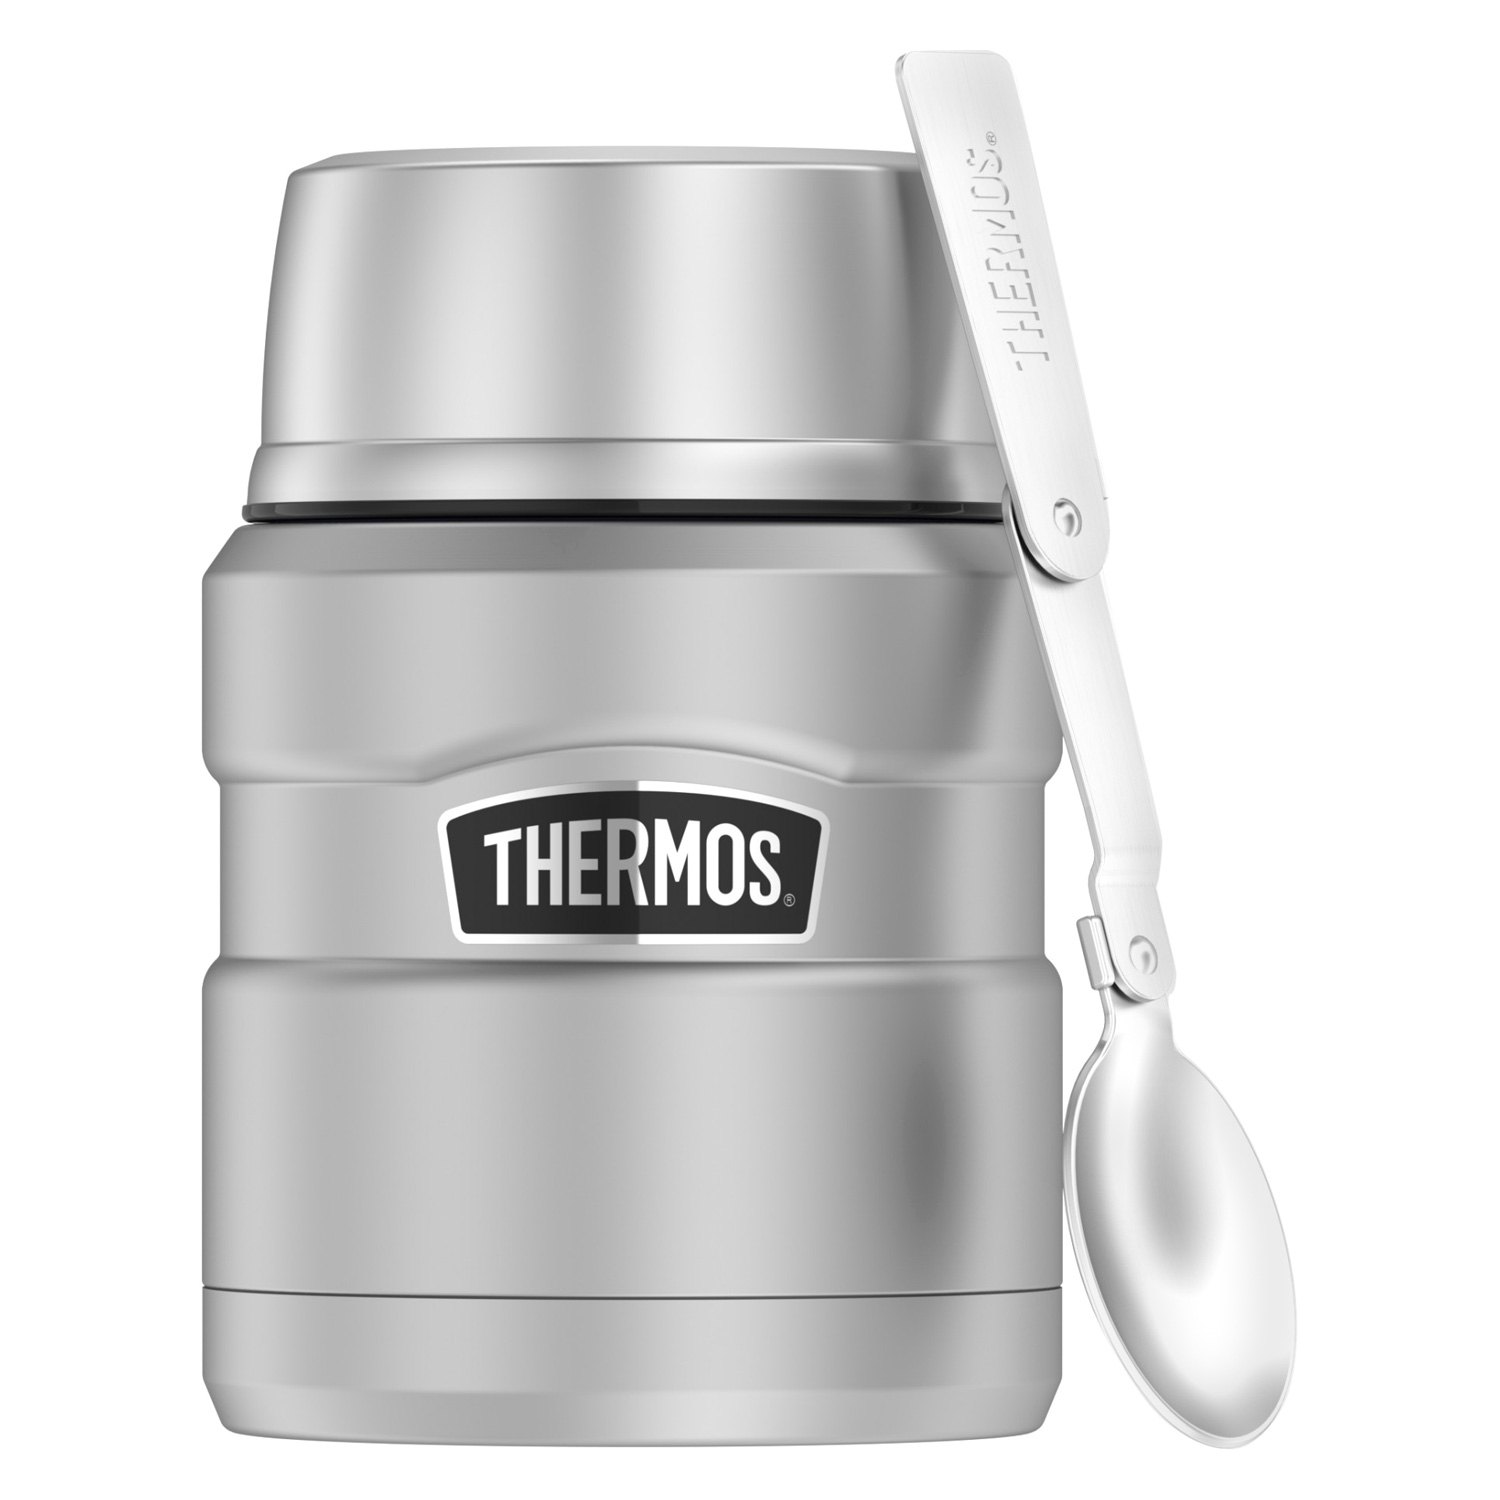 https://images.recreationid.com/thermos/items/sk3000mstri4-3.jpg